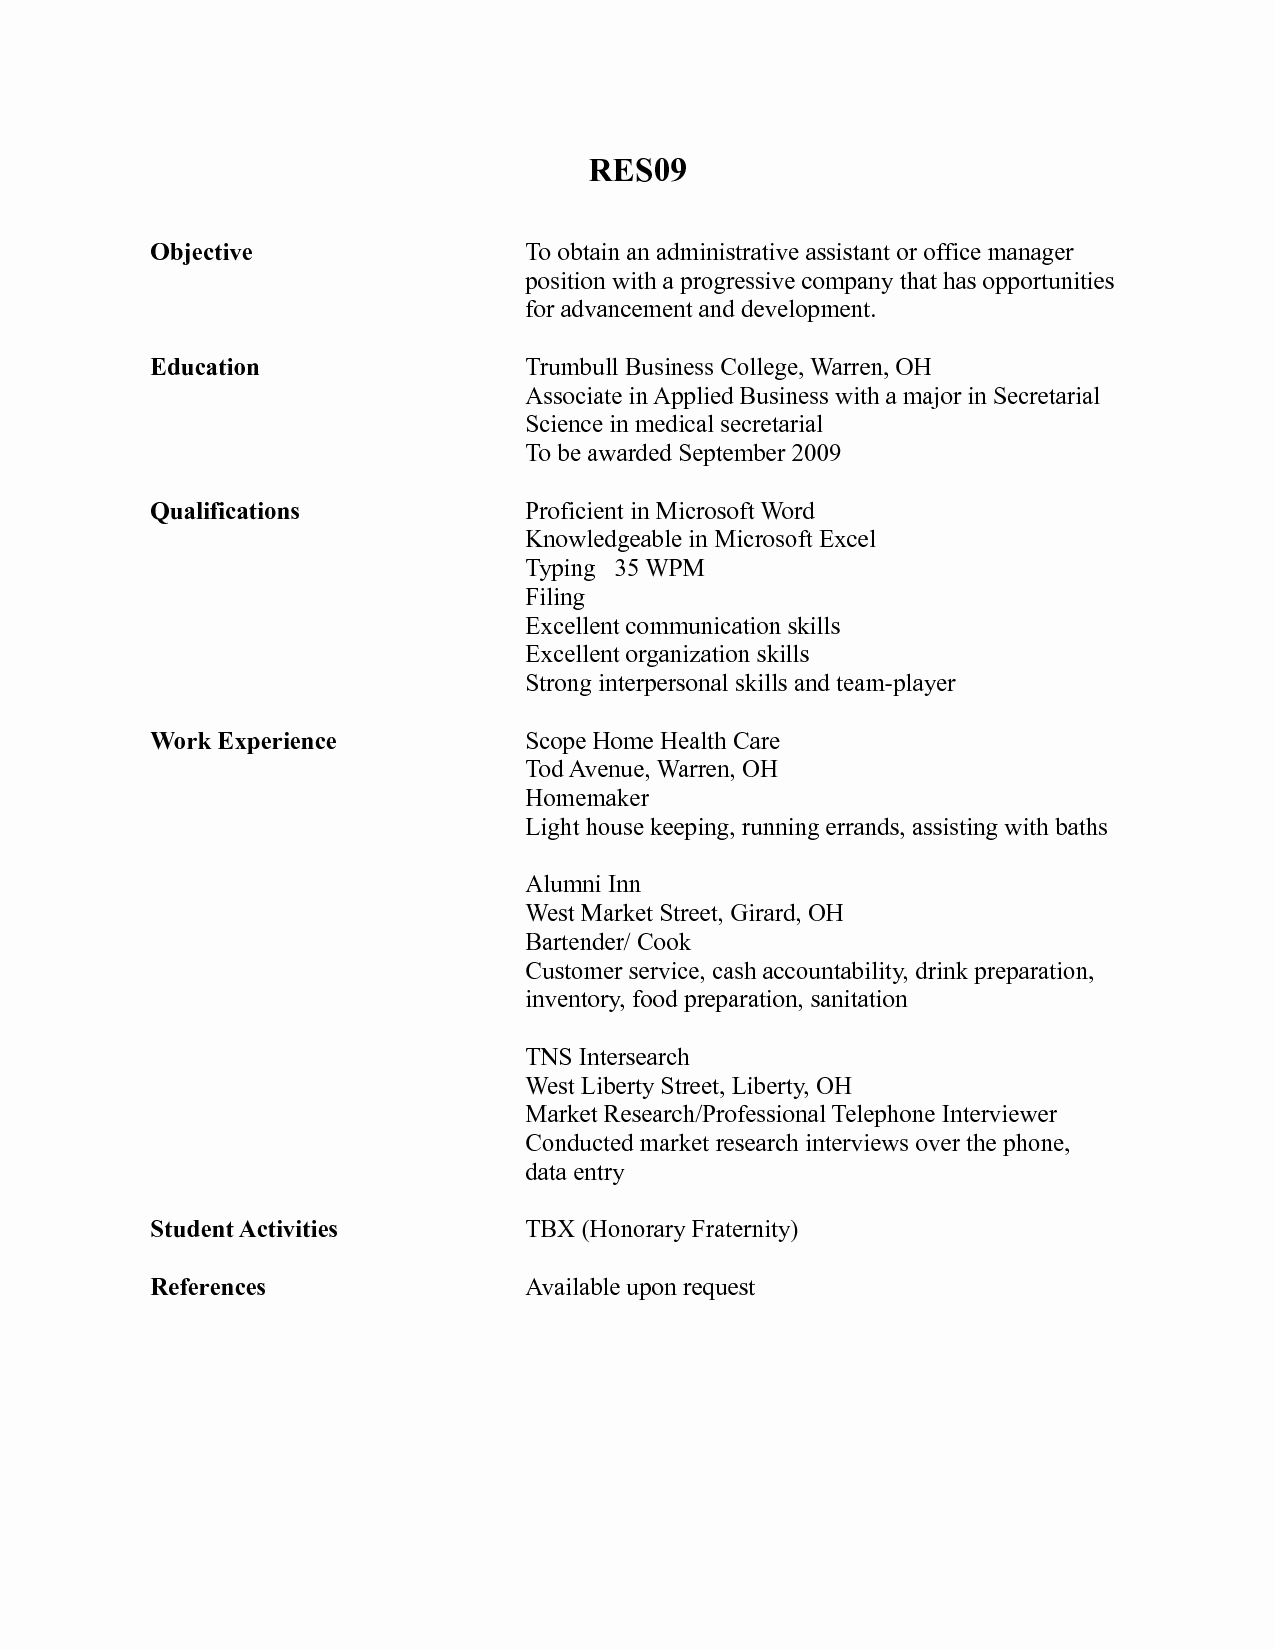 Administrative assistant Resume Objective Fresh Administrative assistant Objective Samples In Resume for